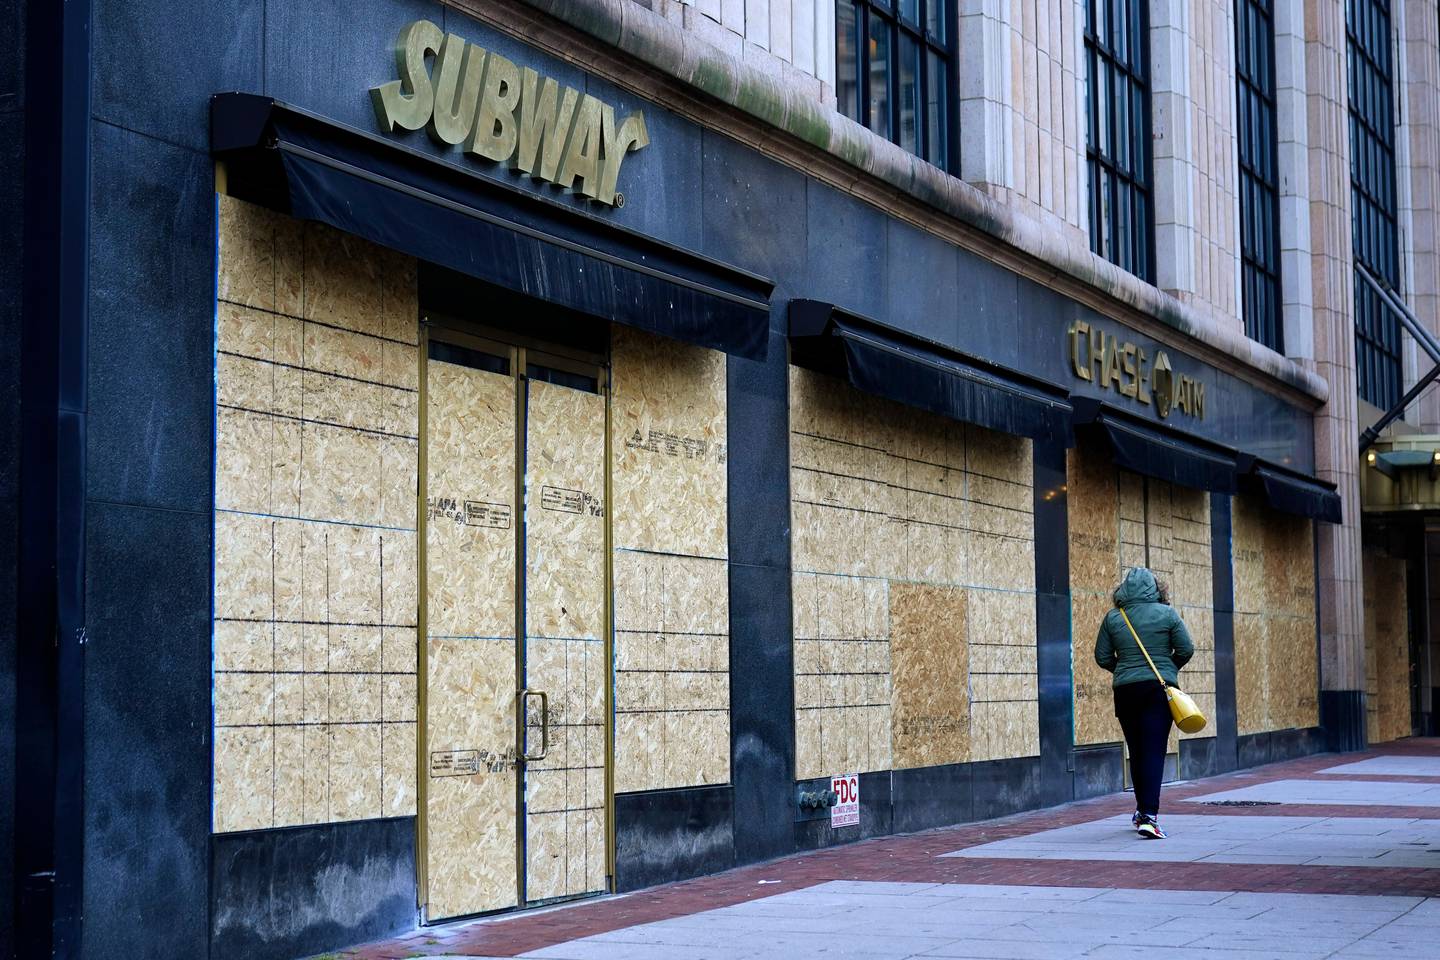 A woman walks past boarded-up businesses on the eve of the 2020 General Election in the United States, Monday, Nov. 2, 2020, in Philadelphia. (AP Photo/Matt Slocum)